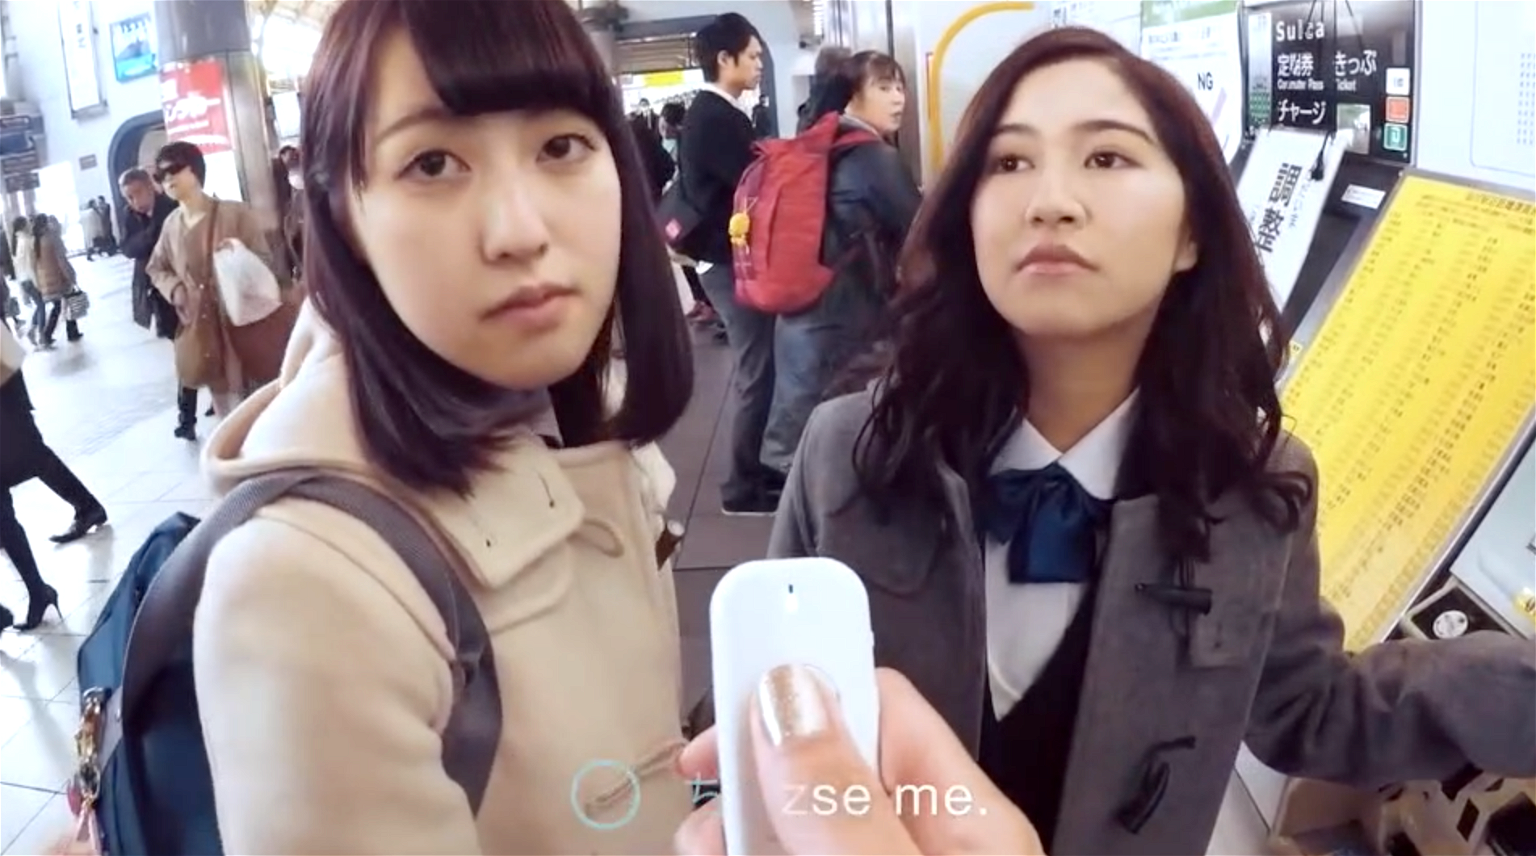 Viral Gadget Can Instantly Translate English to Japanese/Chinese Without Wi-Fi